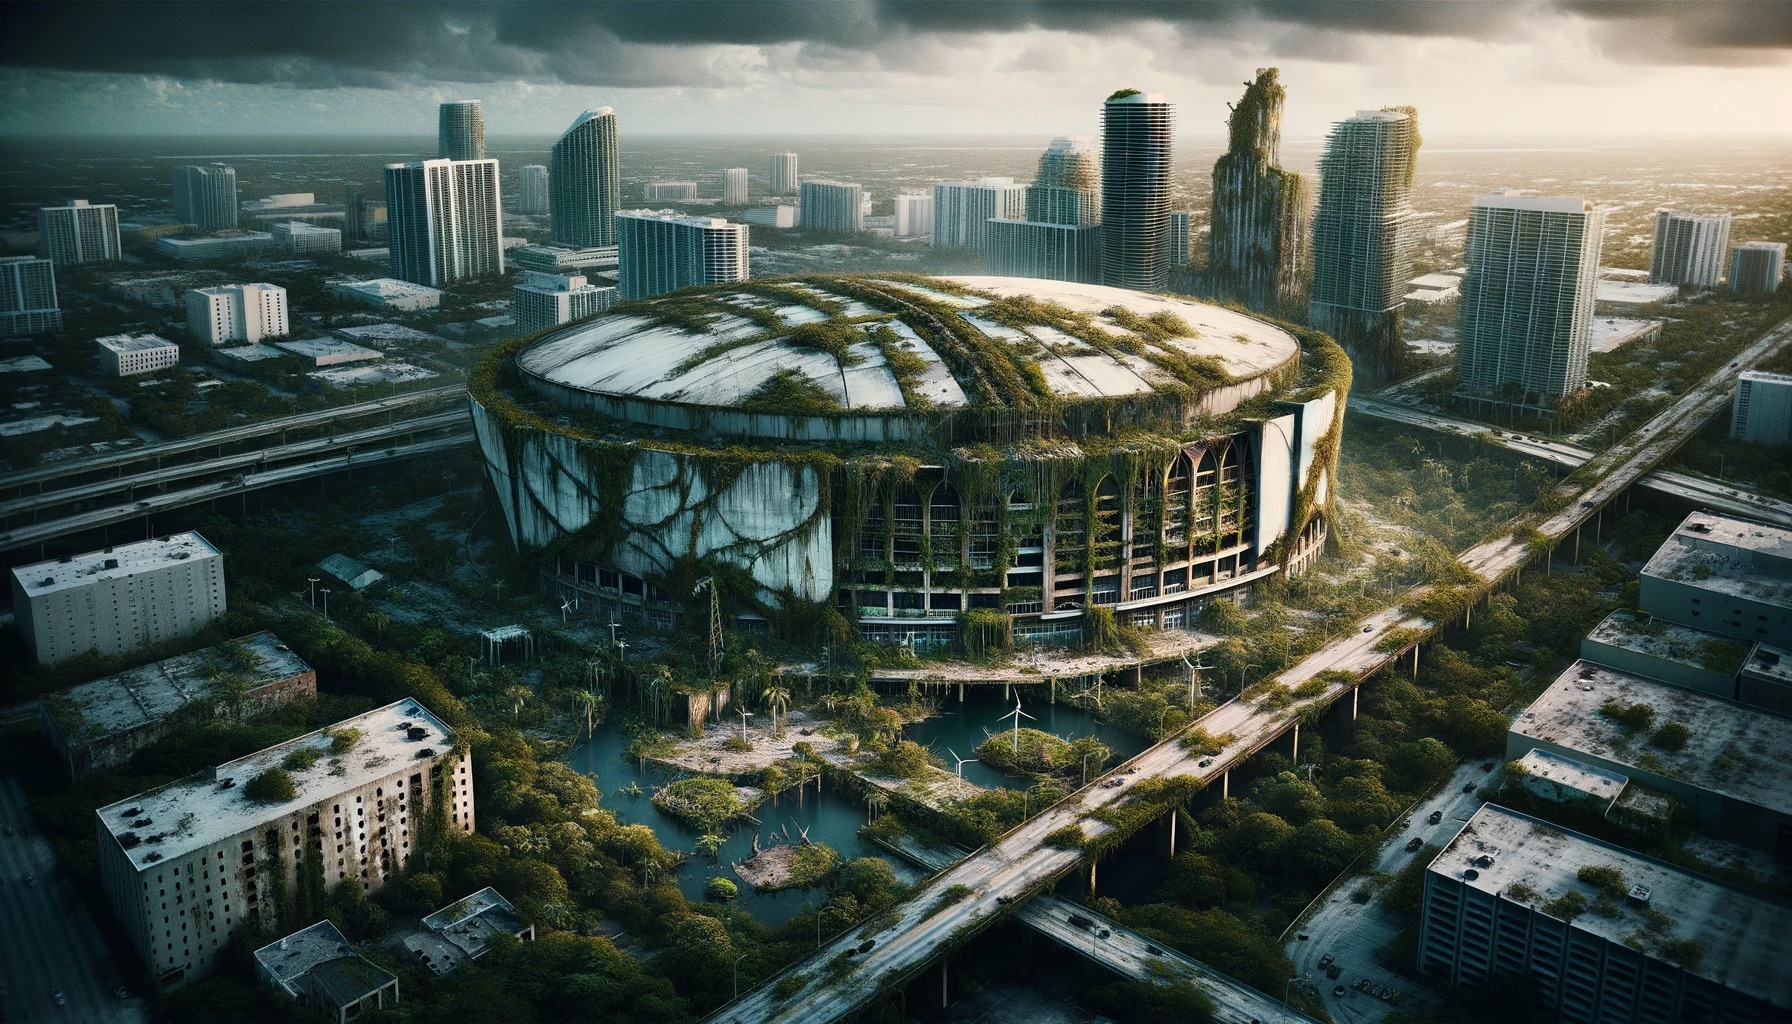 Miami 100 years from now